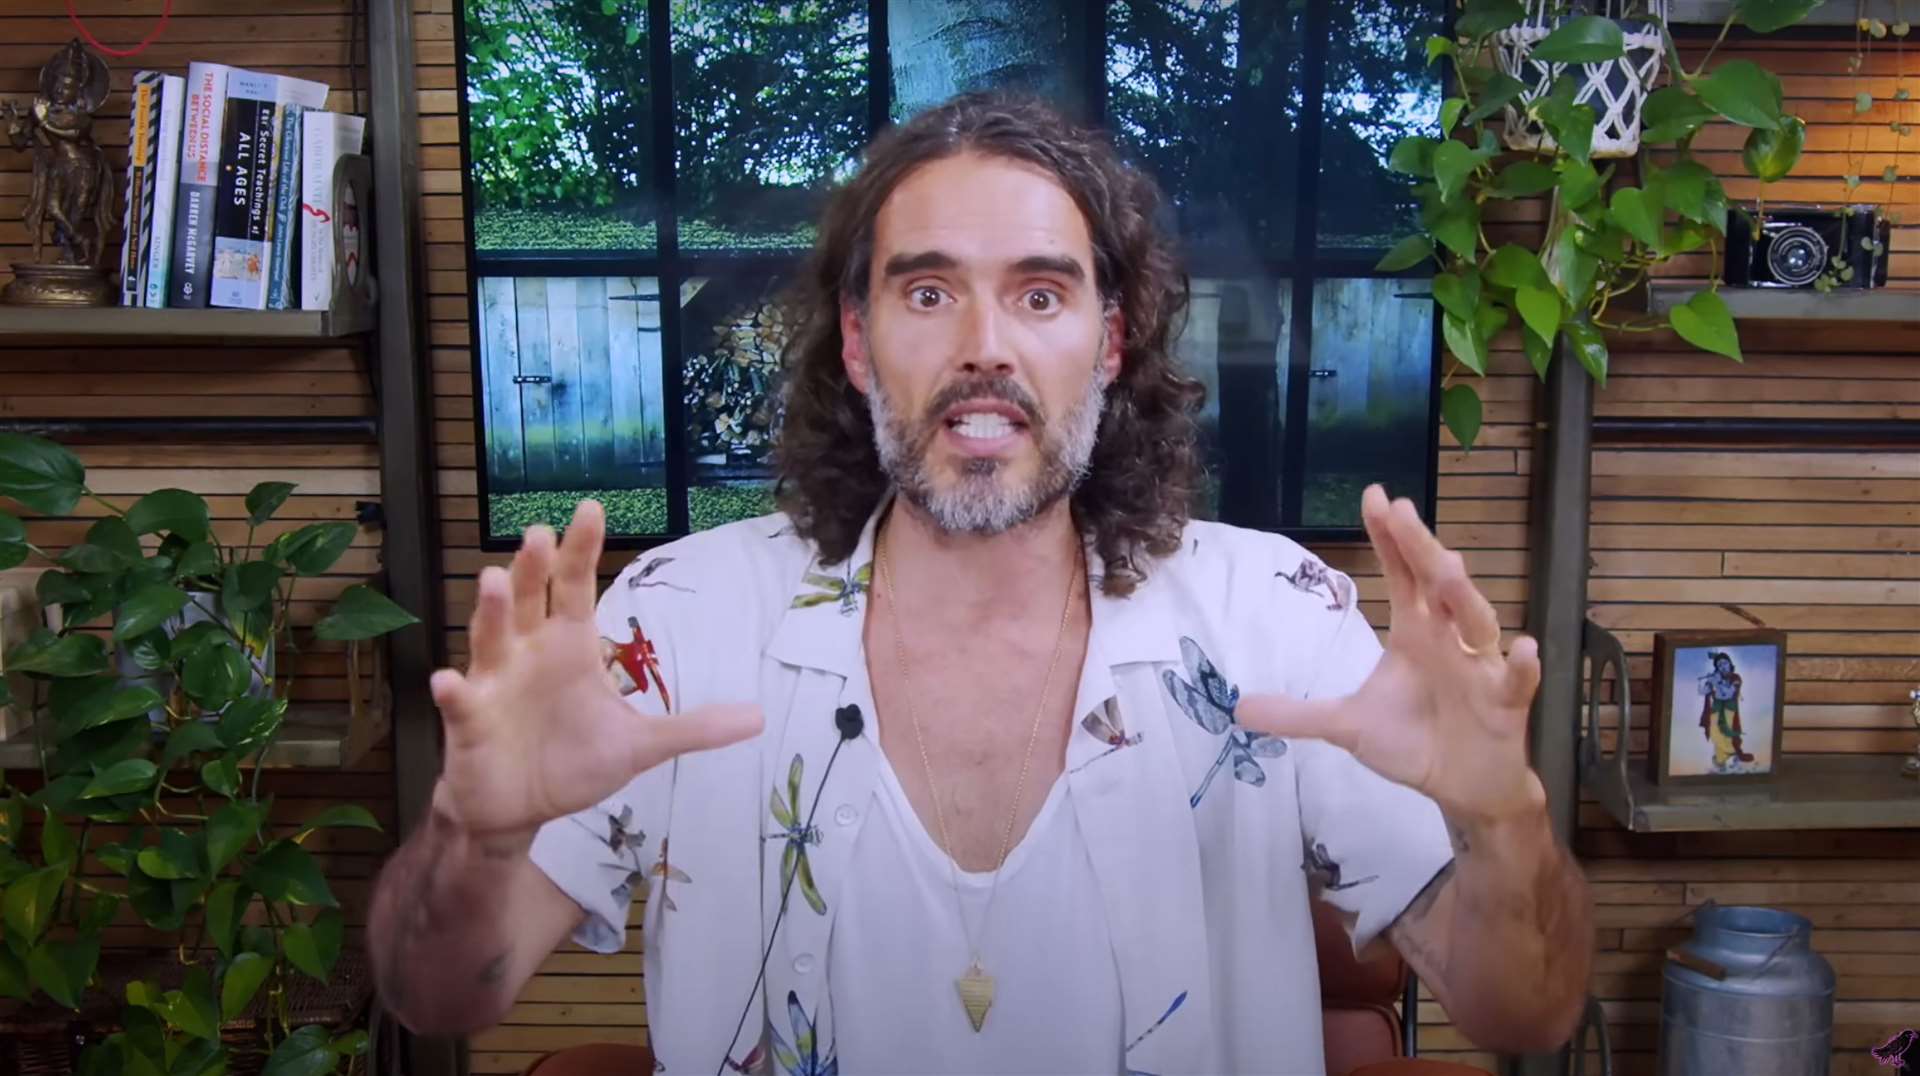 Screengrab taken from footage issued on the YouTube page of Russell Brand during his denial of the accusations made against him (Russell Brand/PA)